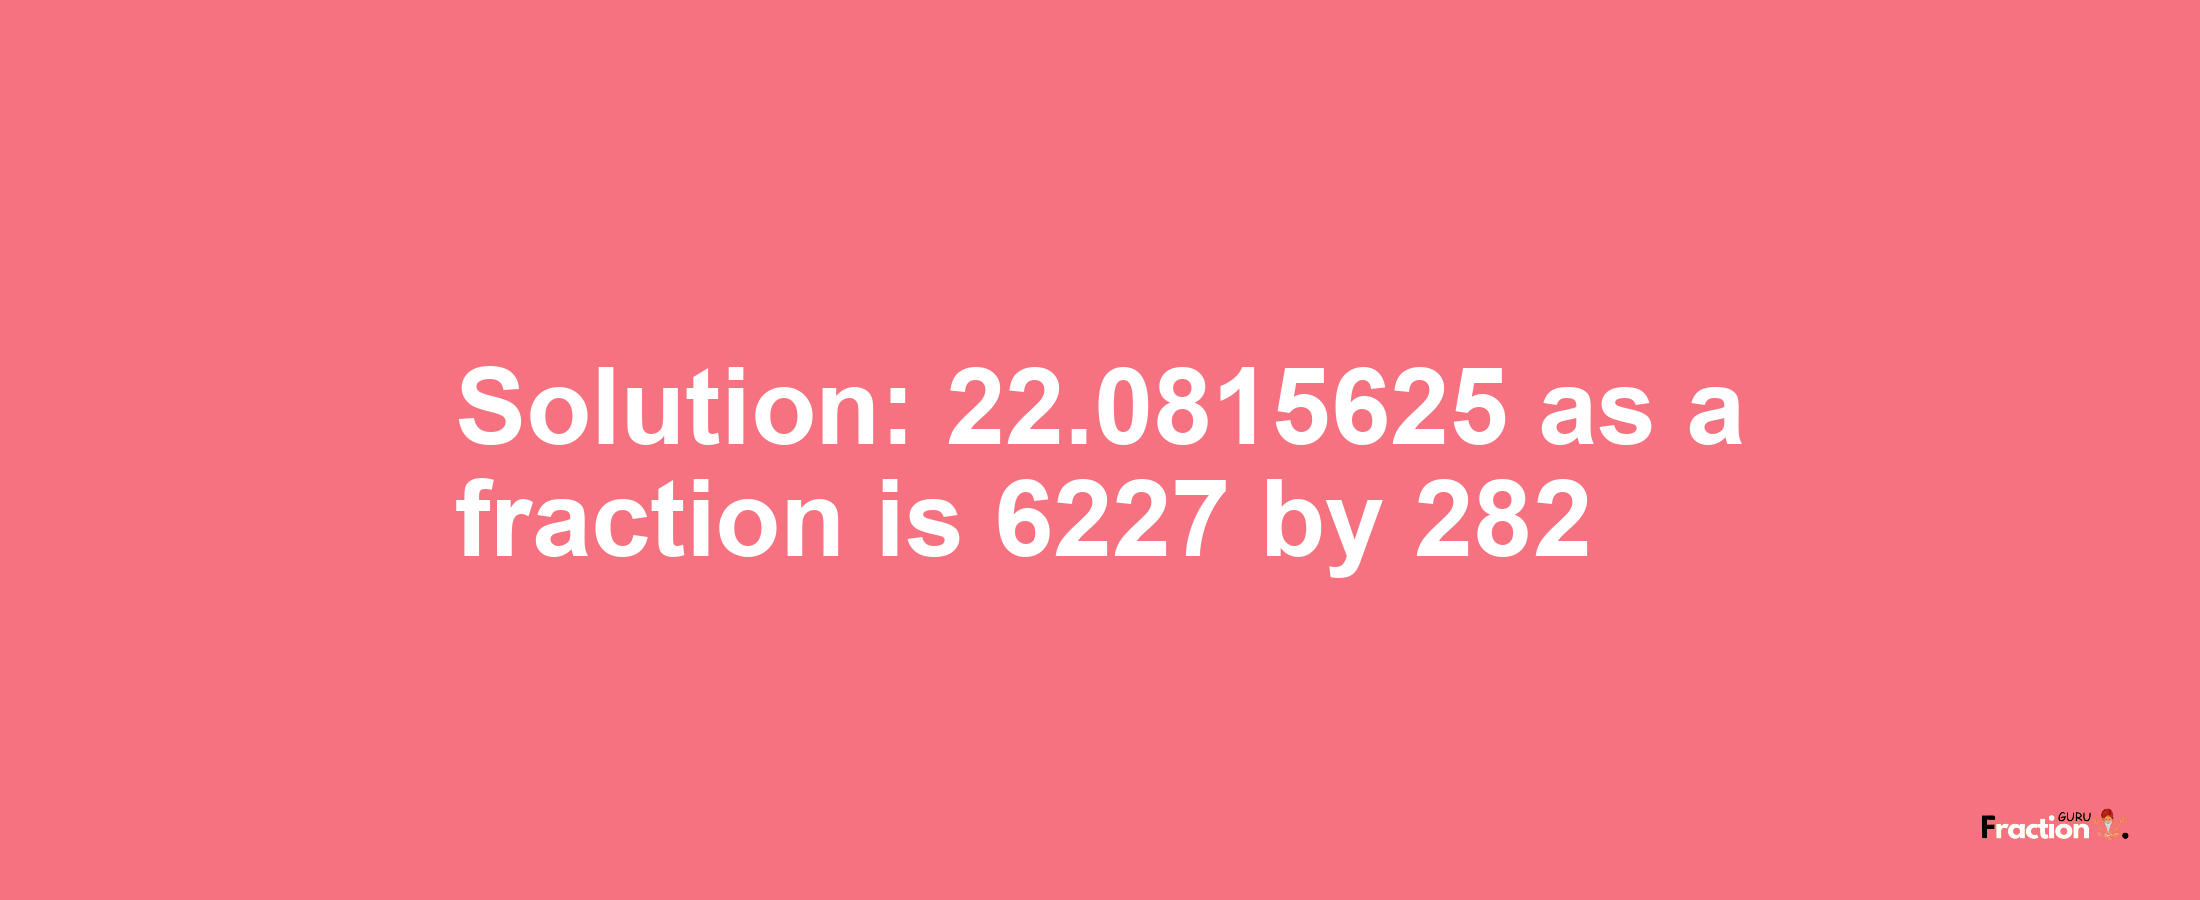 Solution:22.0815625 as a fraction is 6227/282